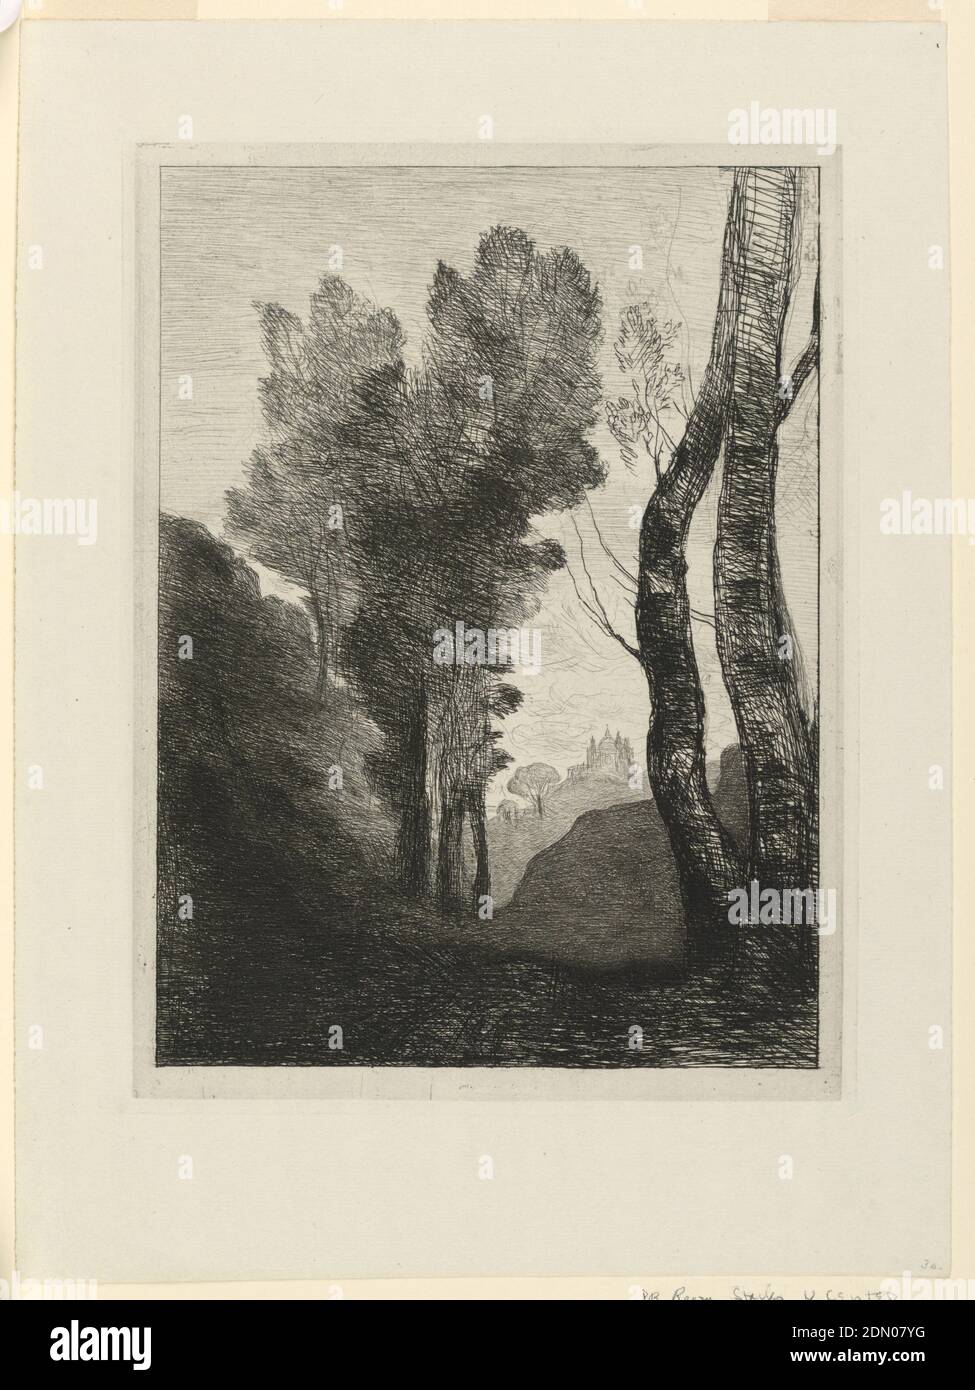 Environs de Rome, Jean Baptiste Camille Corot, French, 1796 – 1875, Etching and drypoint on blue-gray machine-made laid paper, Beyond a shadowy wooded foreground, with two tree trunks, right, and a group of trees, left, rises a church with a dome and twin towers, situated on the side of a hill., France, 1866, Print Stock Photo